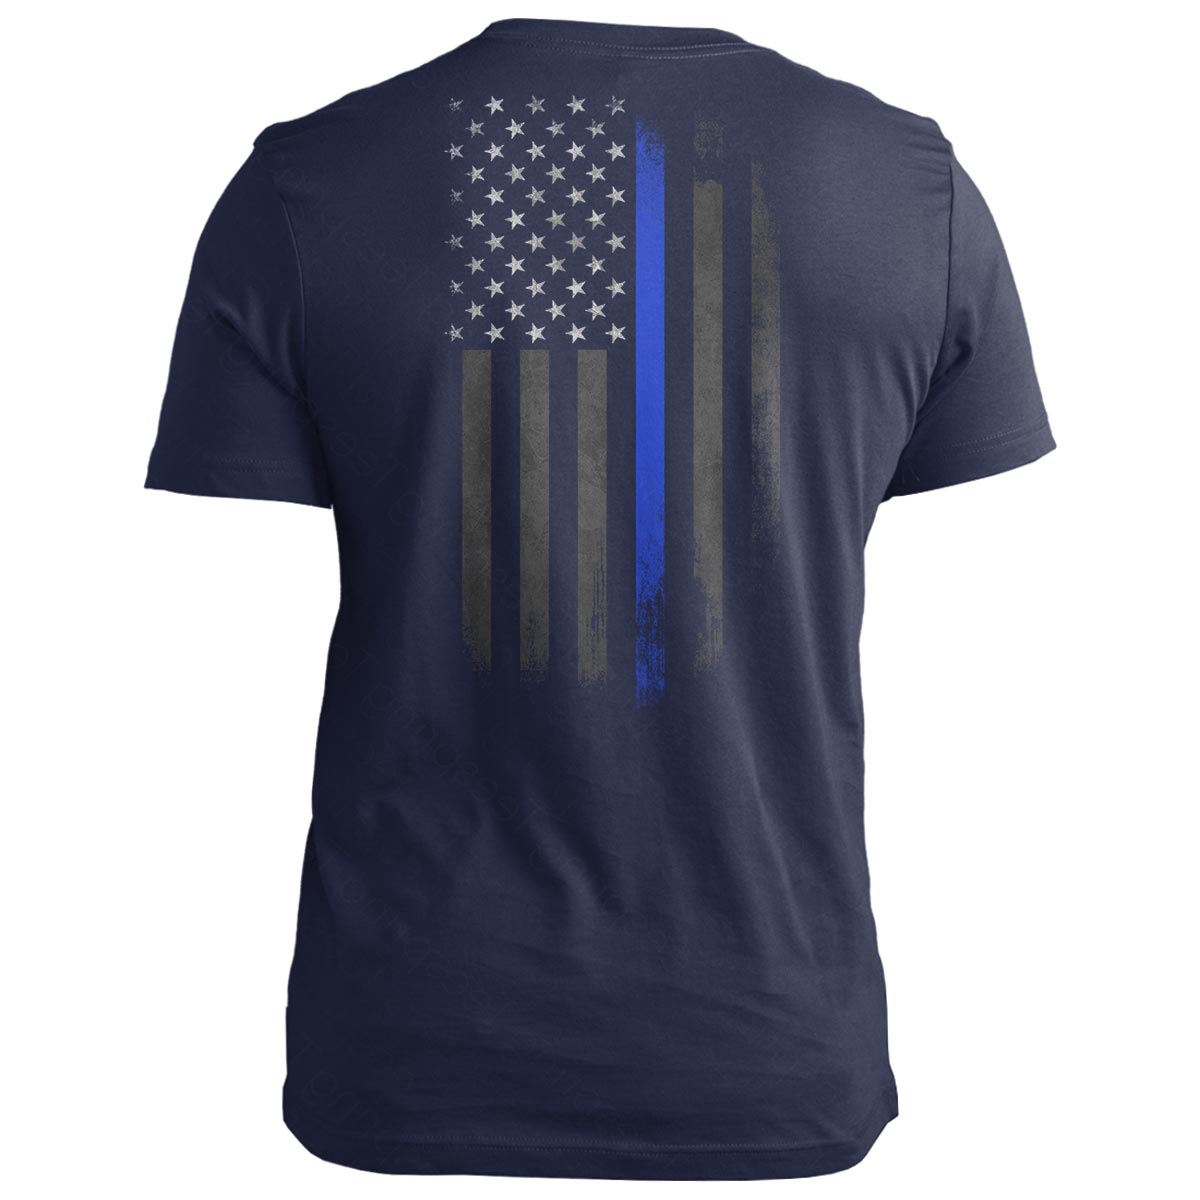 Police: Black and Blue